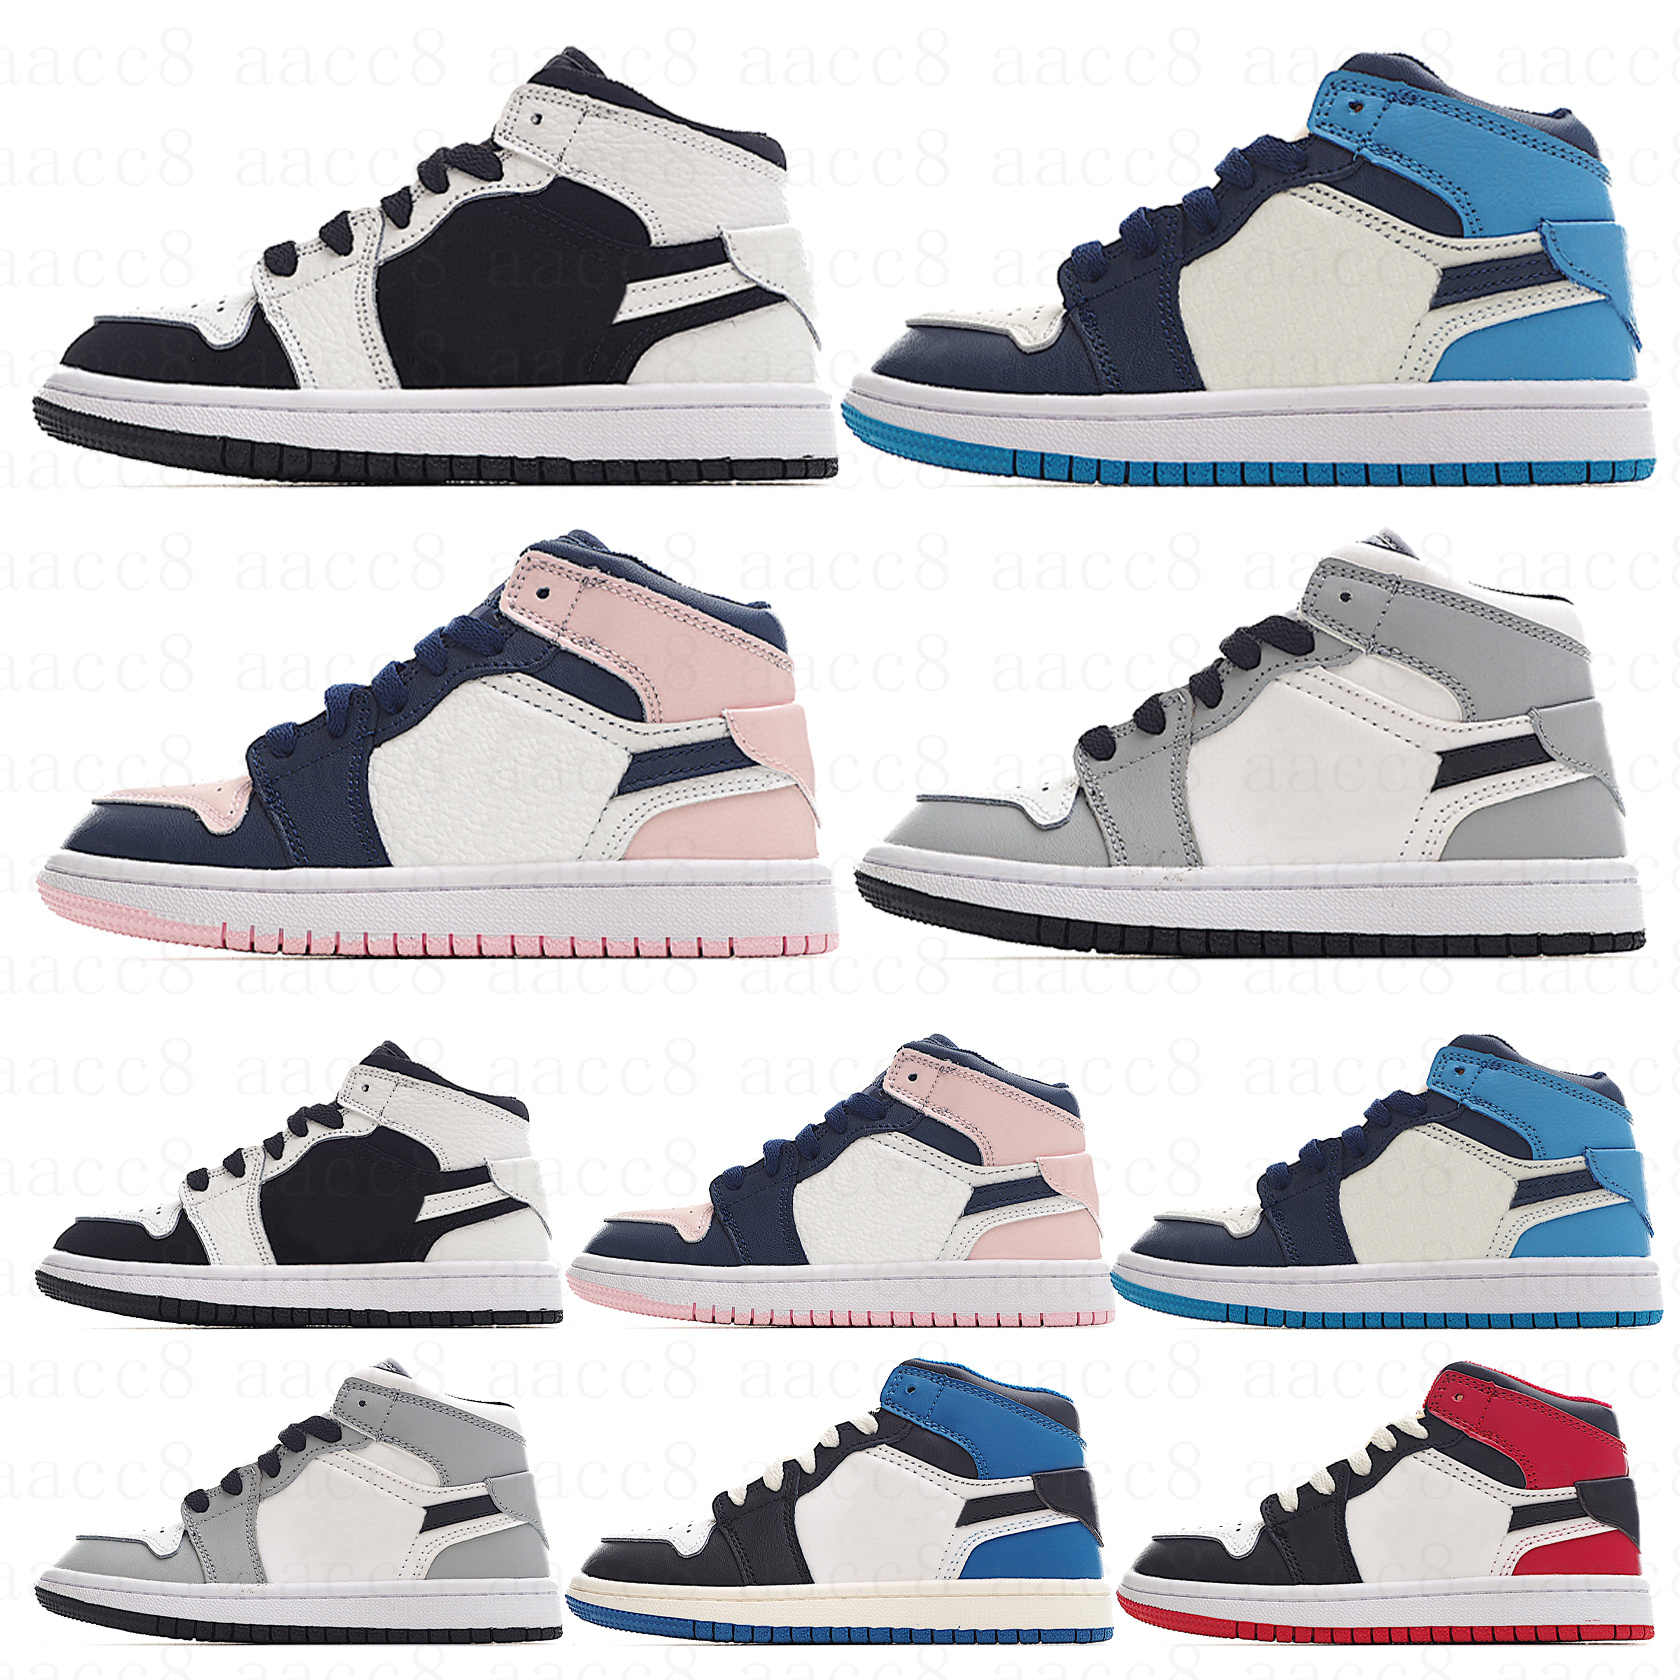 

kids shoes Jumpman 1s high athletic sneakers casual sports children's shoes outdoor J1 High top stitching co branded style size 24-37.5 HJCI3